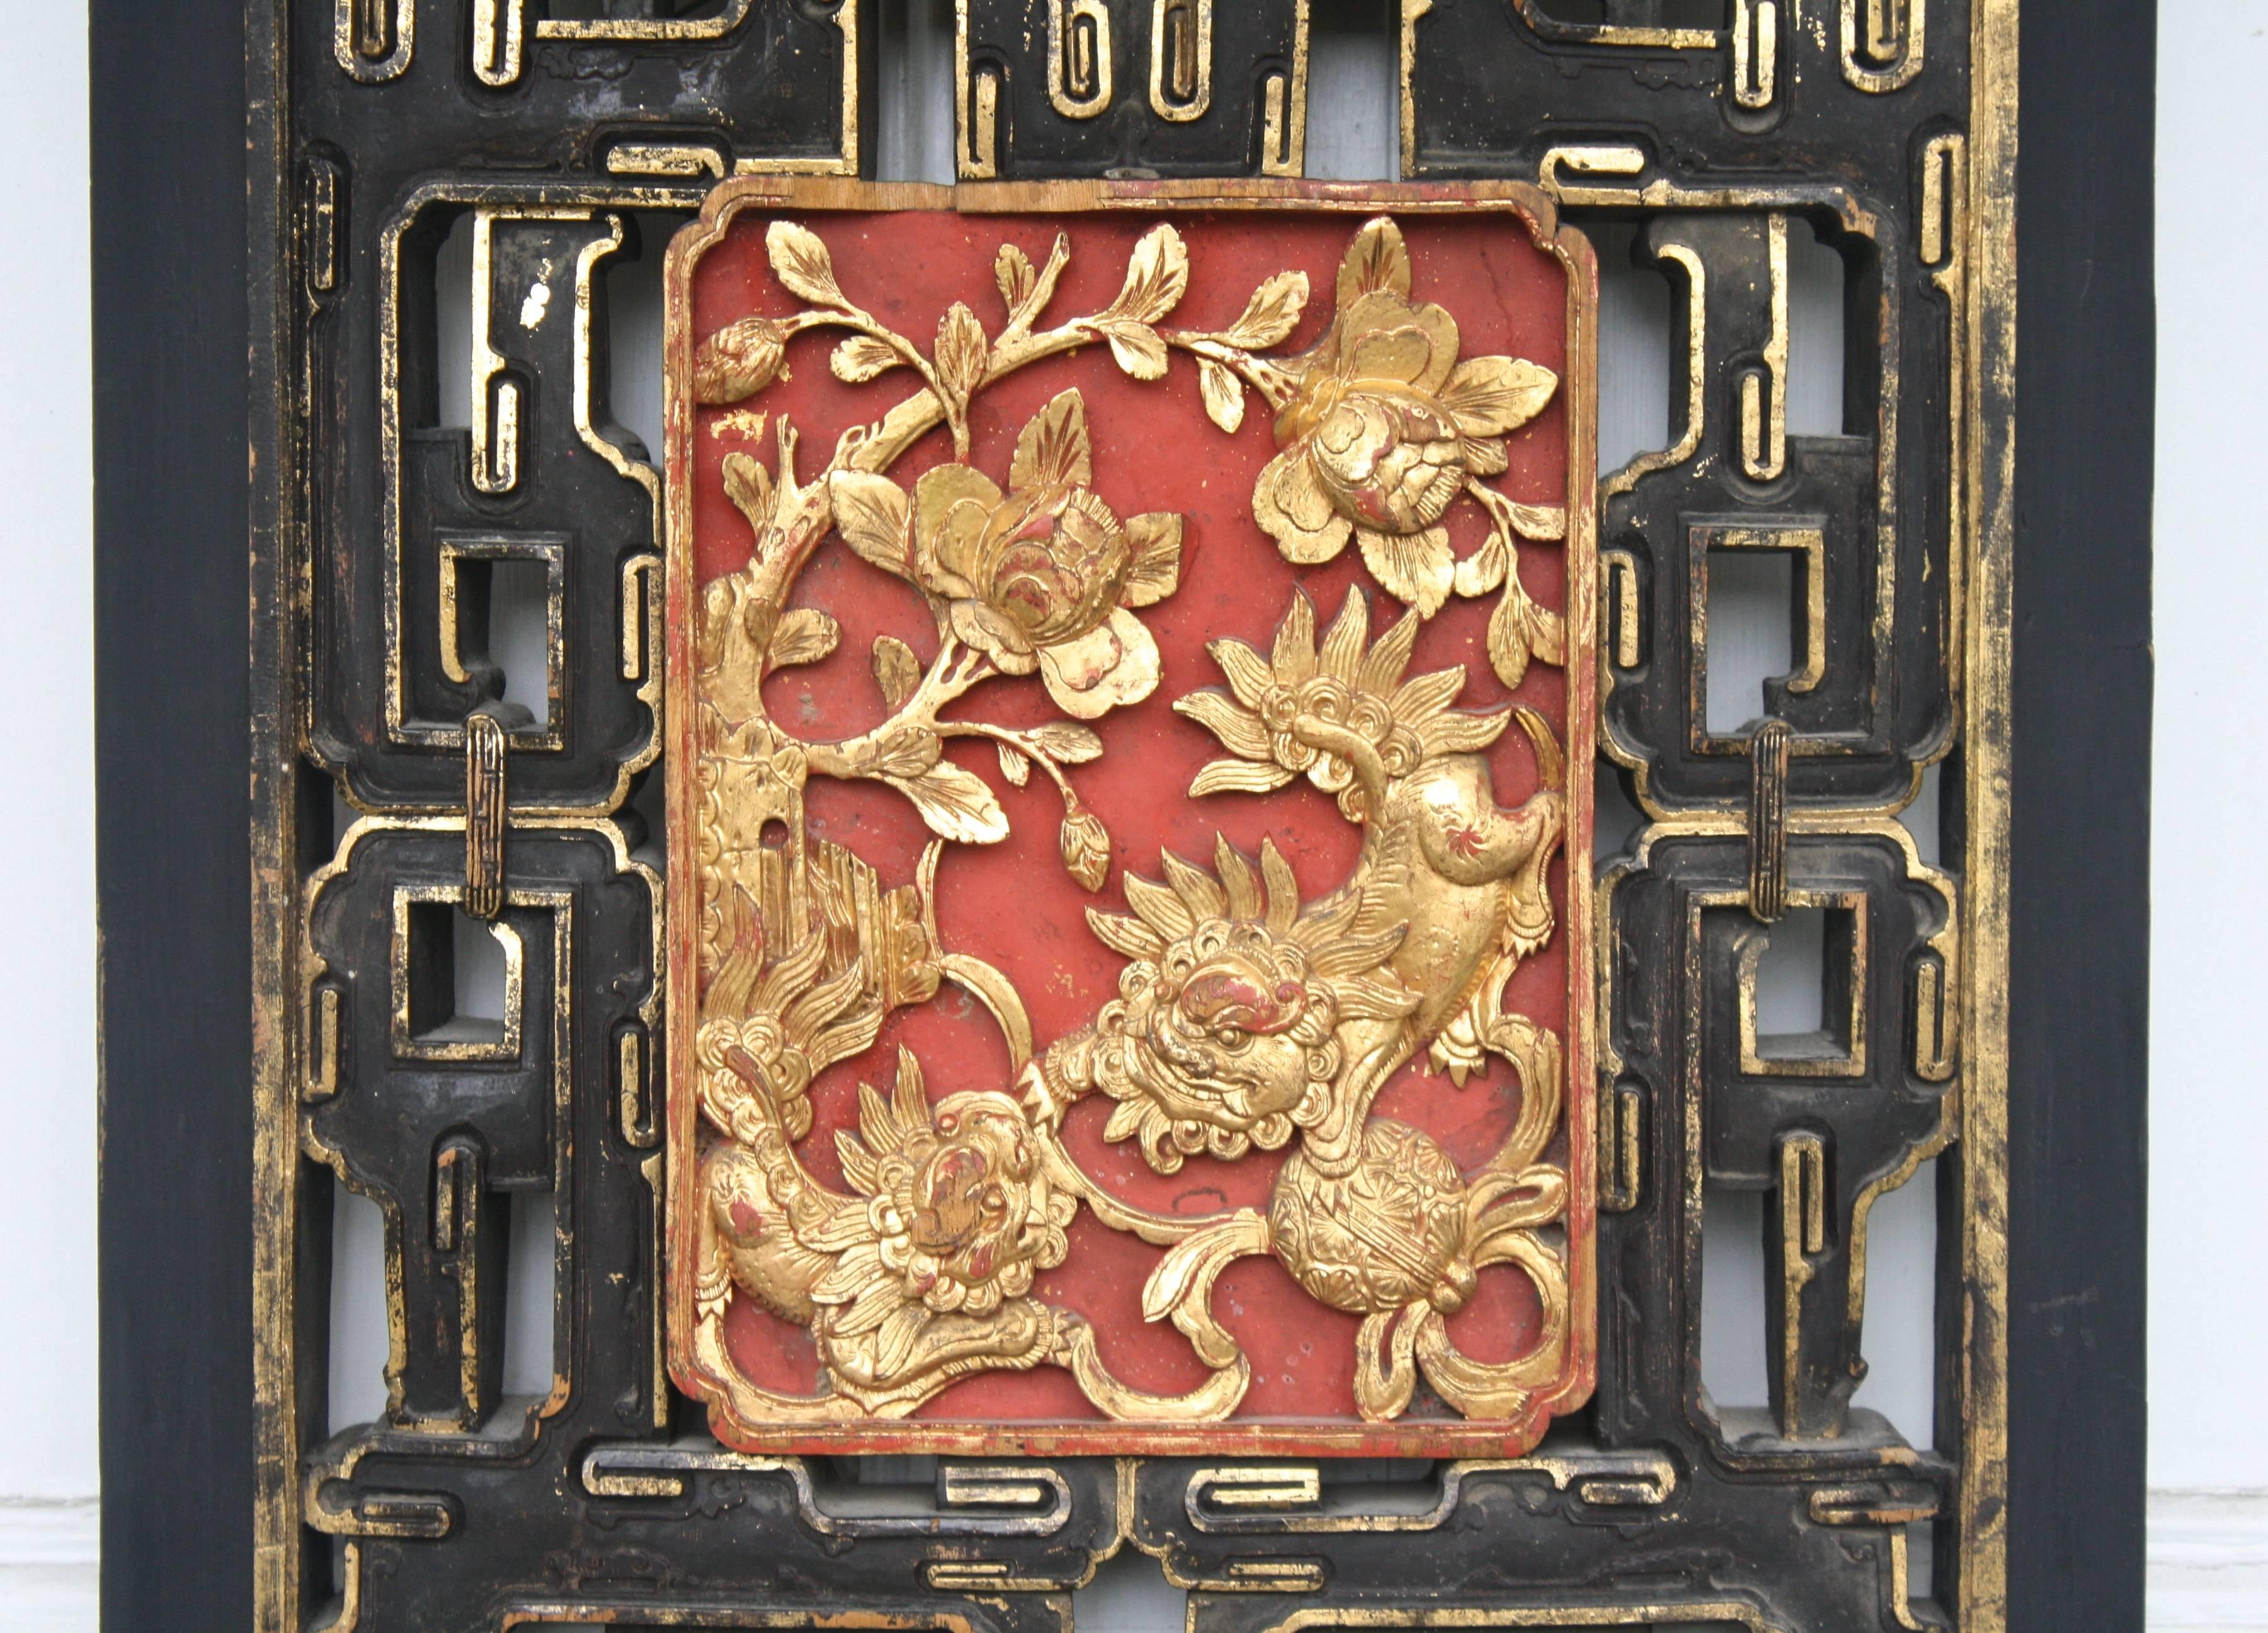 A pierce-carved door panel 'inset' of the Daoguang reign, featuring a center plaque of two gilded sentry lions among foliage on a solid red background. The surrounding pierce-carved framing is ebonised with applied parcel-gilt. The reverse side of